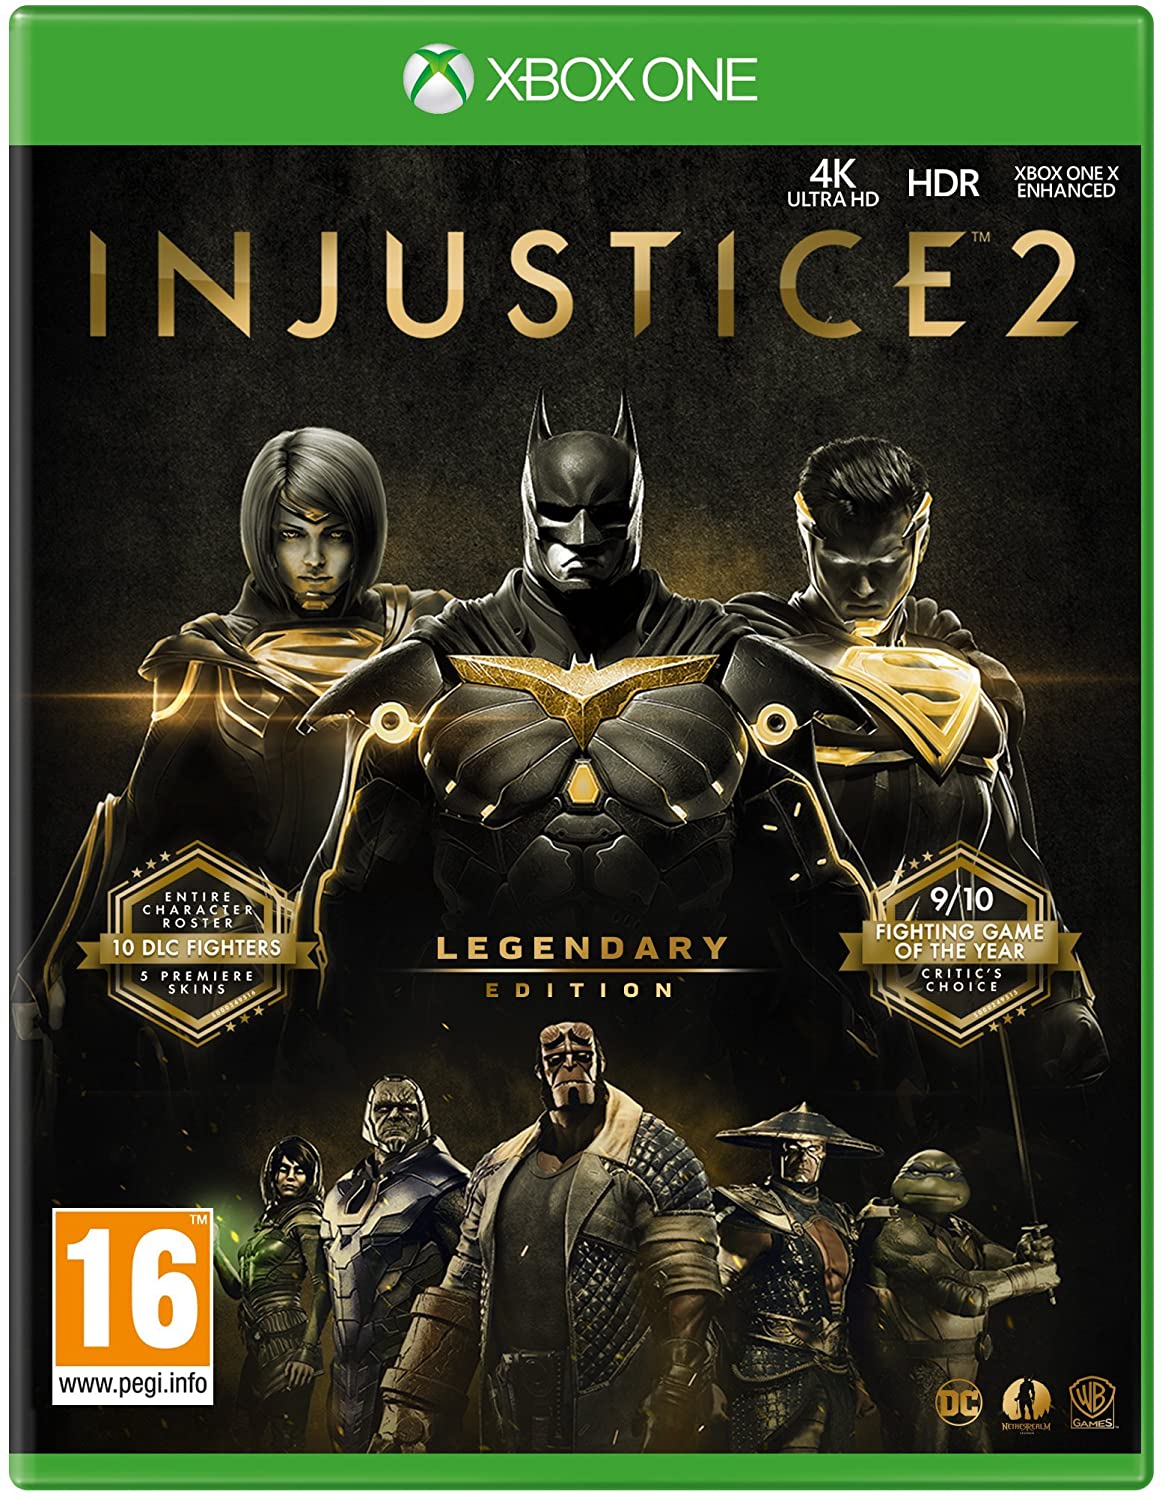 Injustice 2: Legendary Edition Video Game (Xbox One)